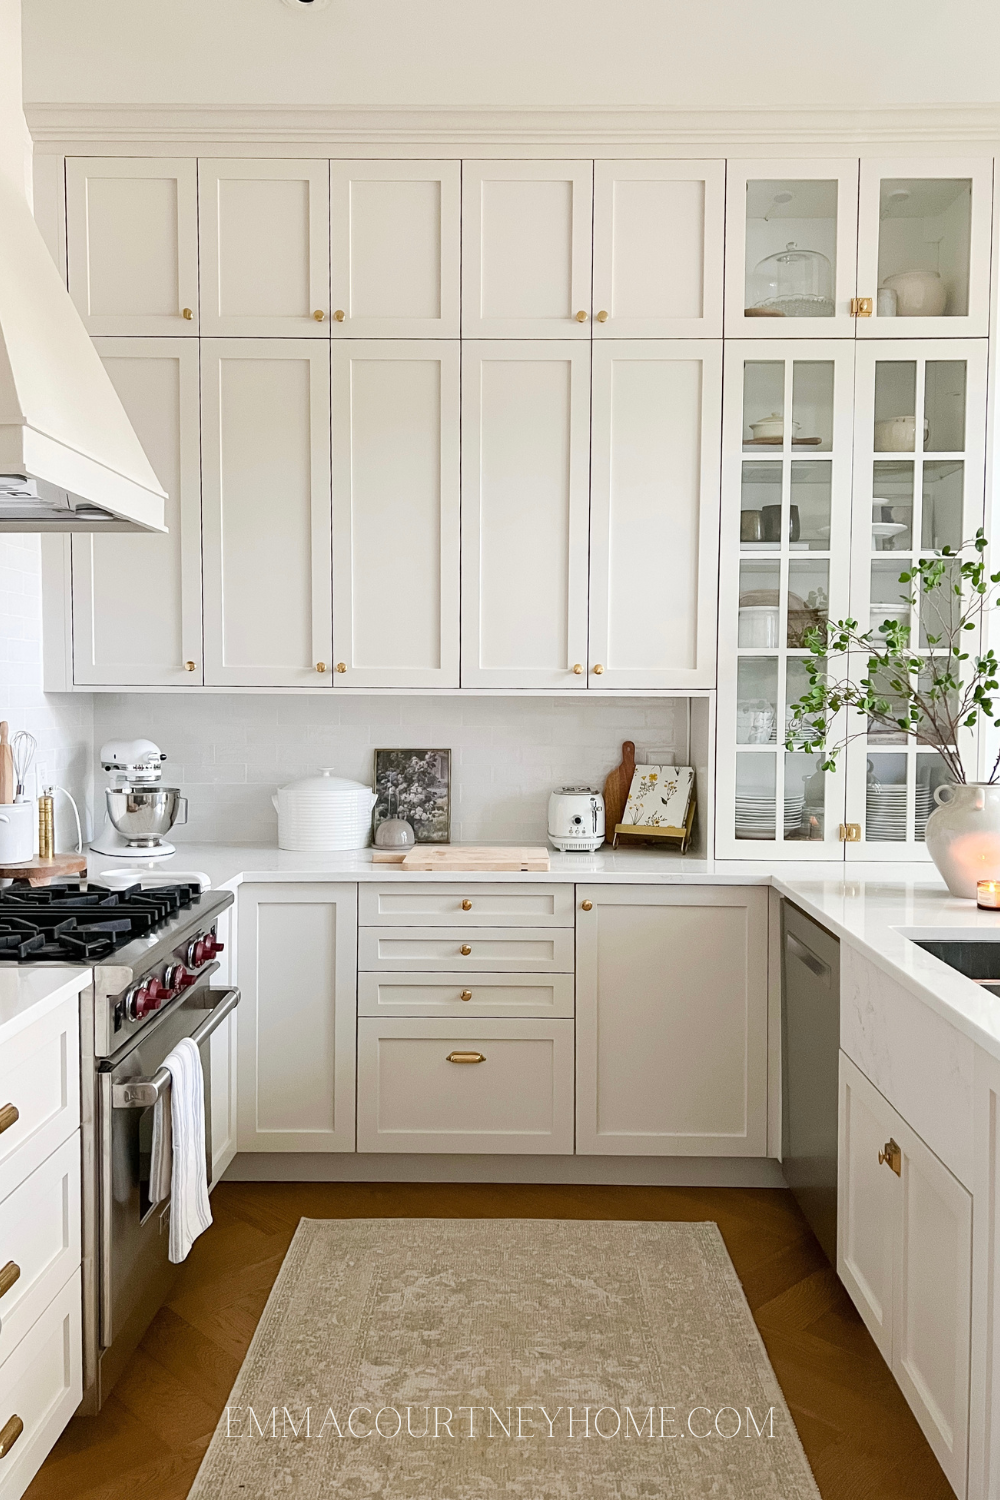 How to Design Your Dream Kitchen with
Ikea Cabinets